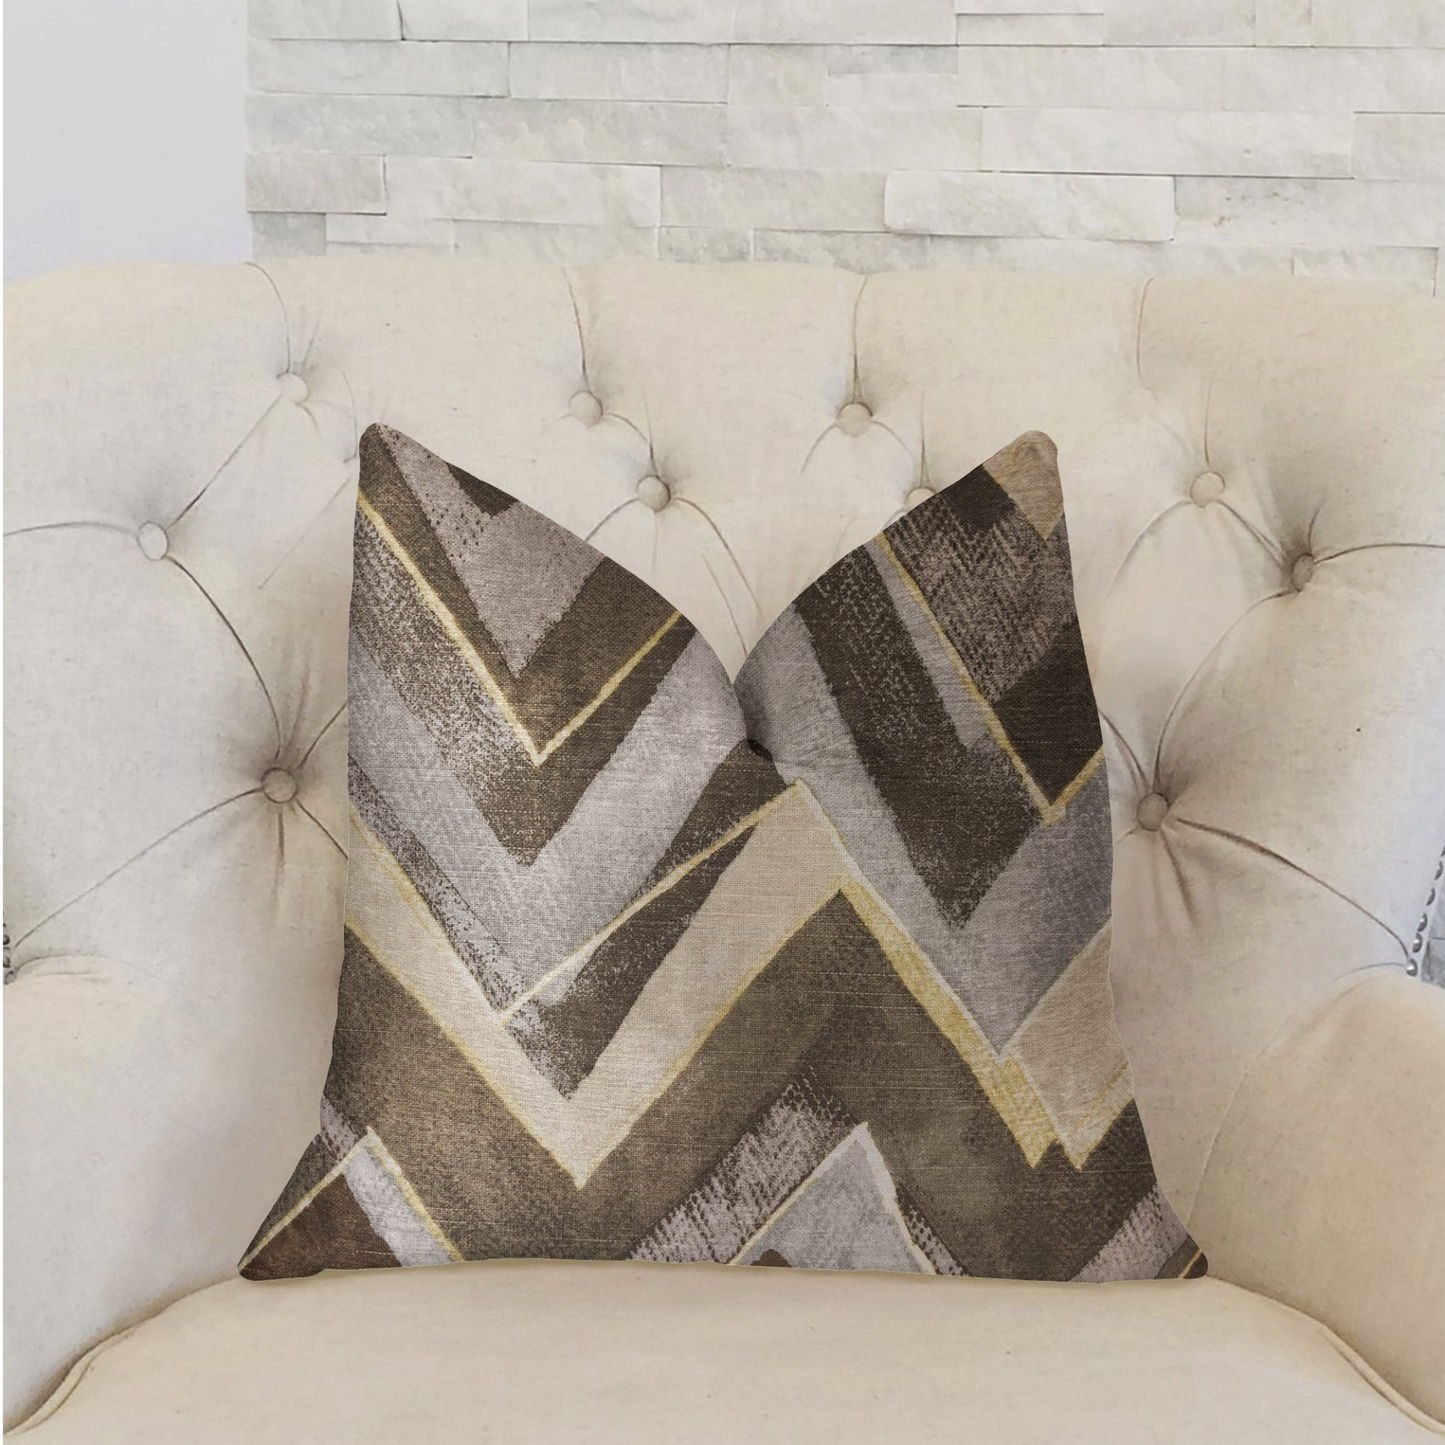 Badger Cove Brown Luxury Throw Pillow